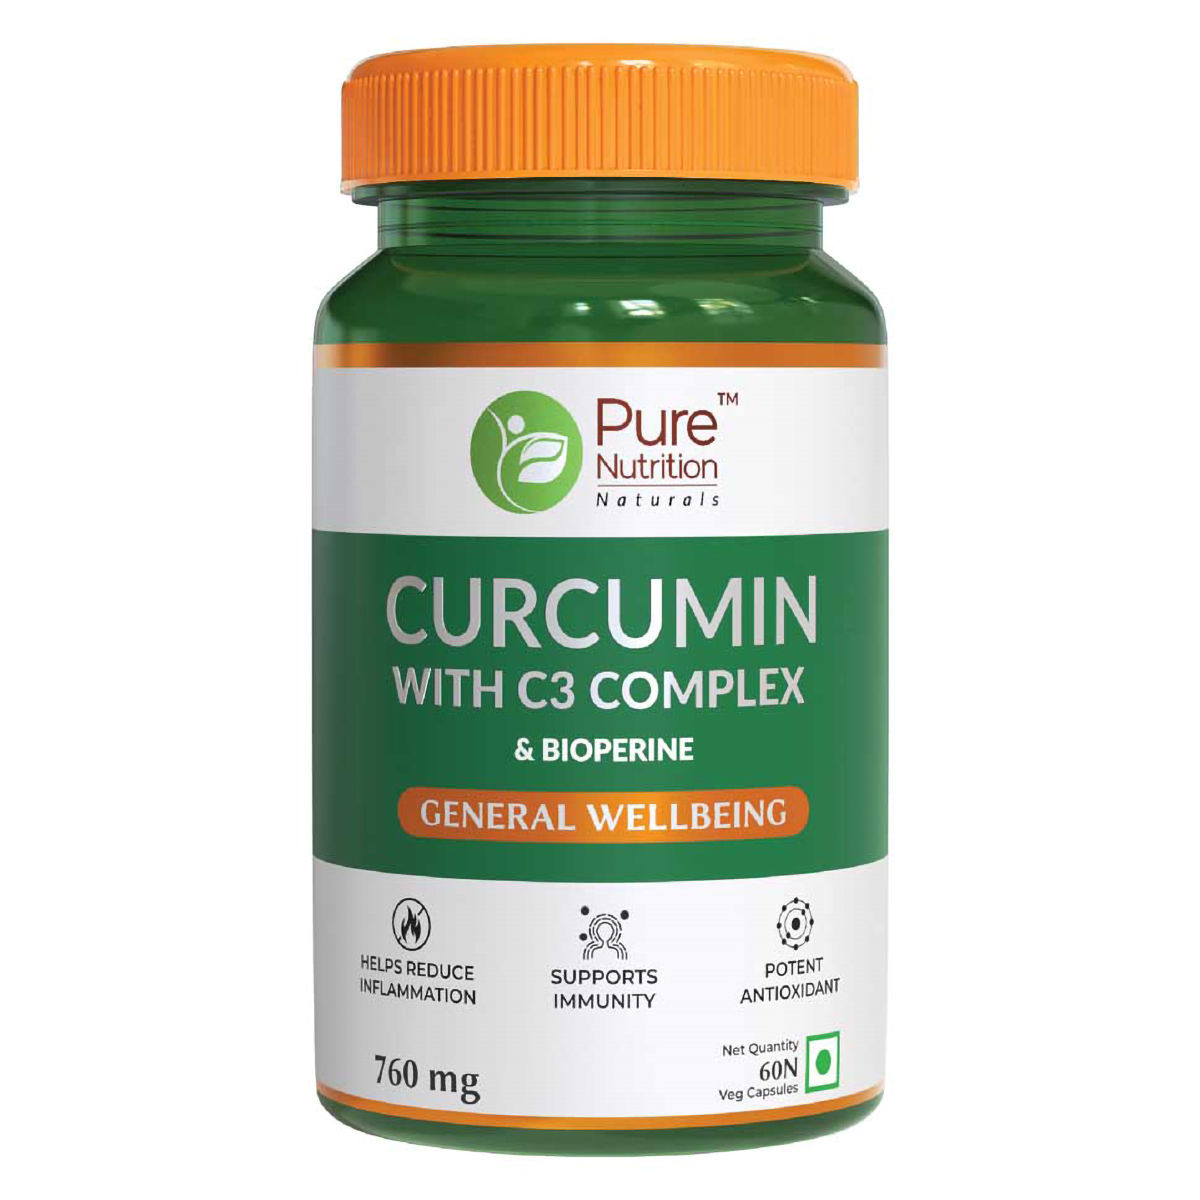 Buy Pure Nutrition Curcumin with C3 Complex 760 mg, 60 Capsules Online